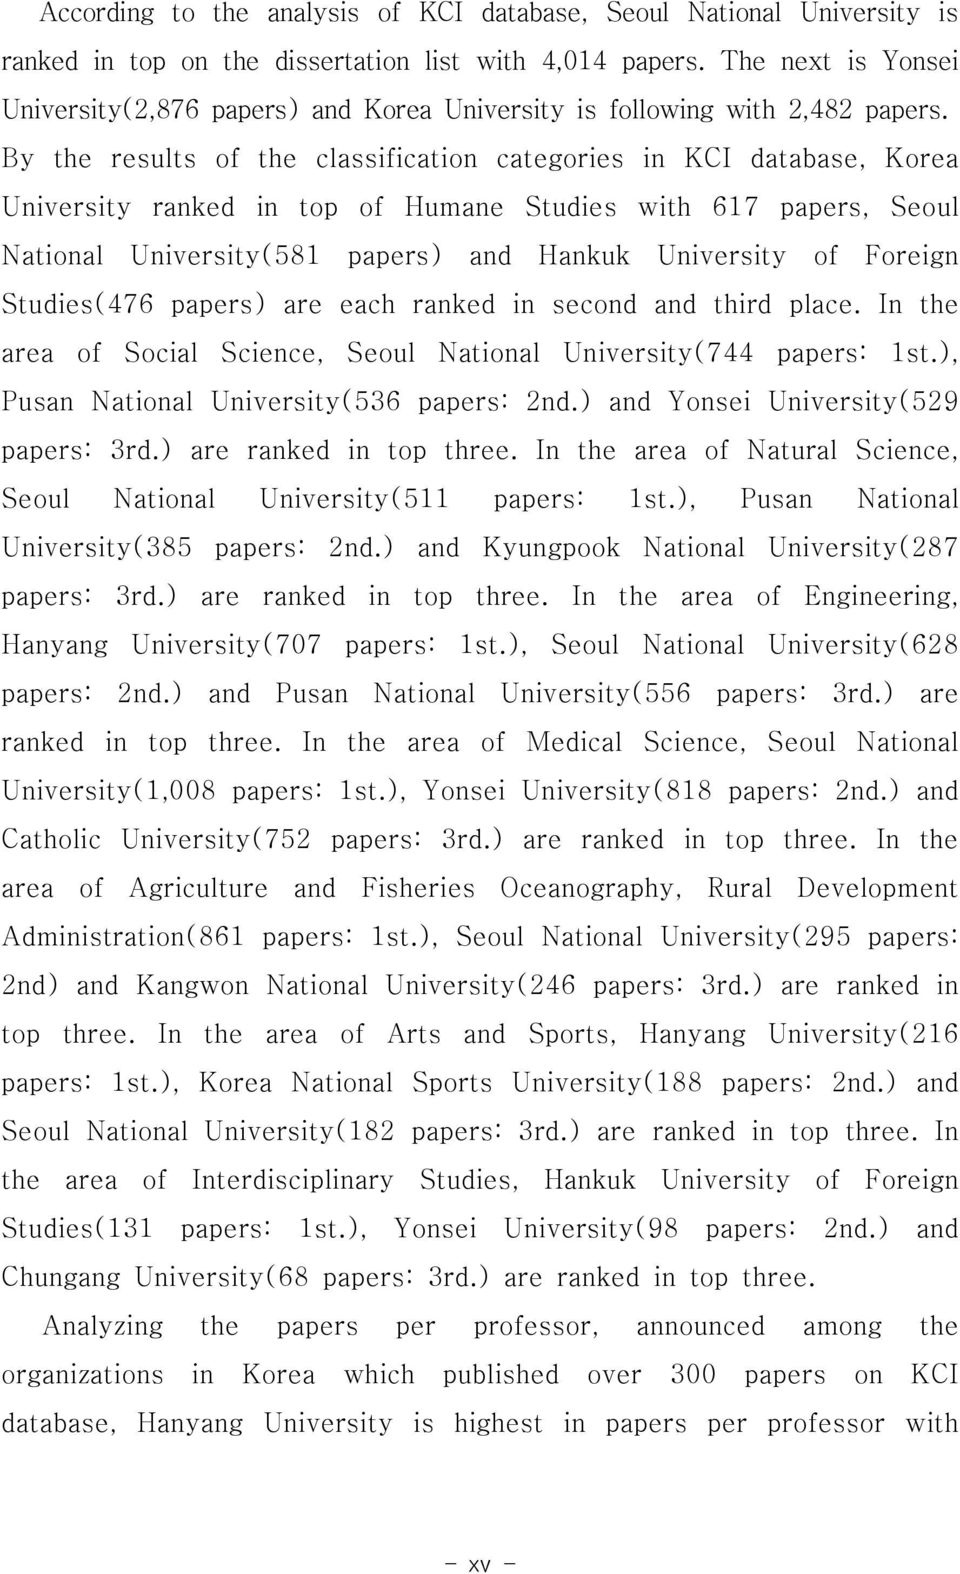 By the results of the classification categories in KCI database, Korea University ranked in top of Humane Studies with 617 papers, Seoul National University(581 papers) and Hankuk University of